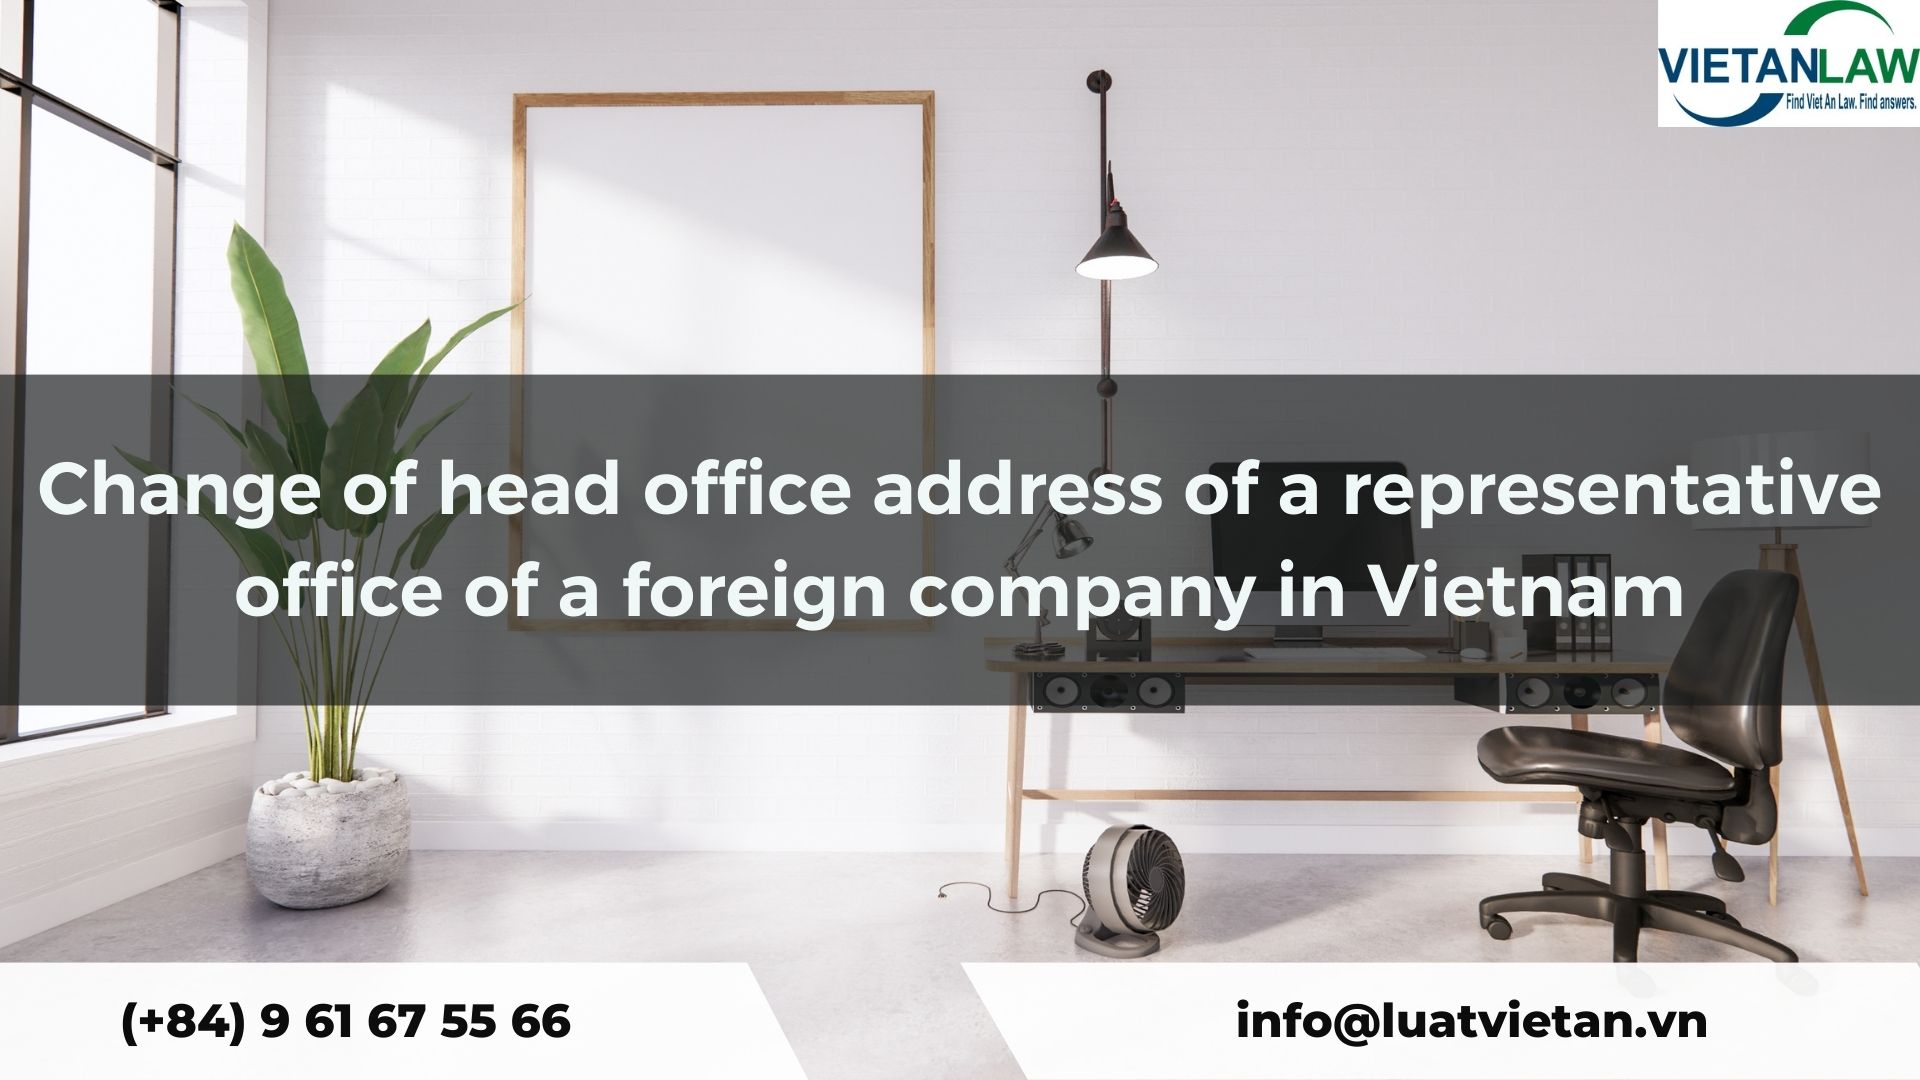 Change of head office address of a representative office of a foreign company in Vietnam